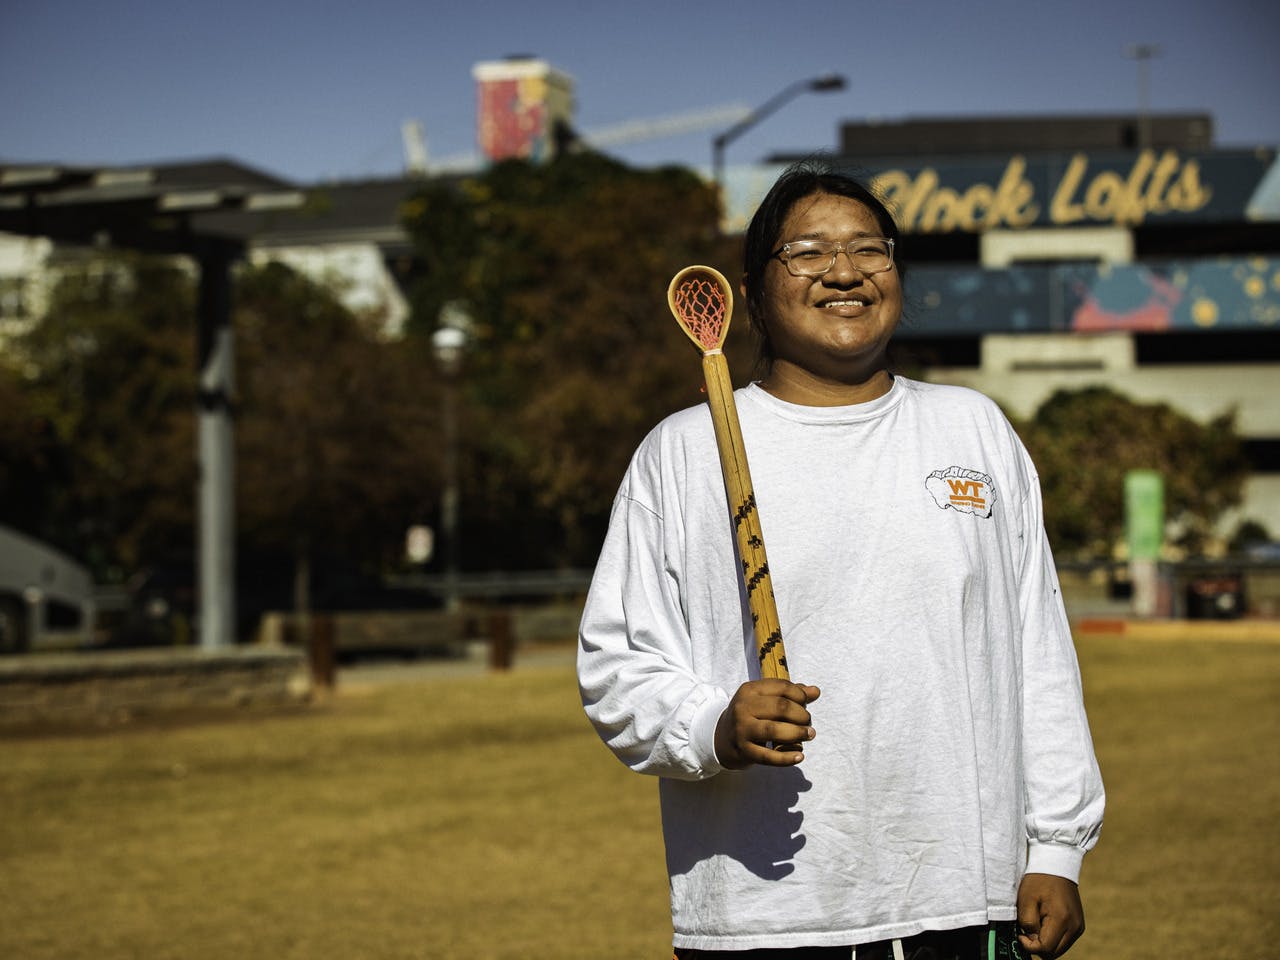 A person stands, holding a toli stick and smiling for the camera.